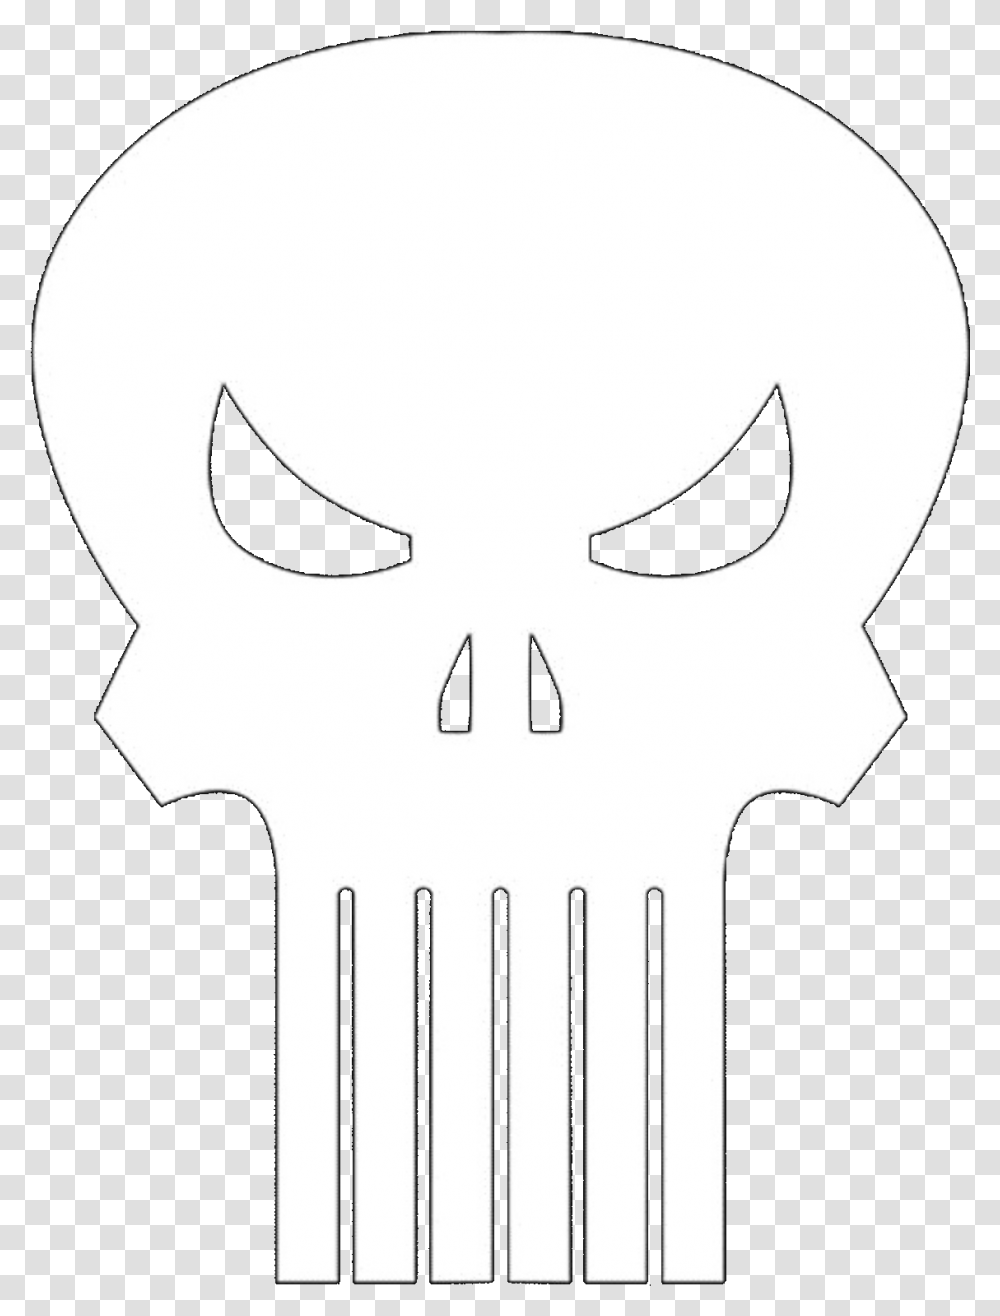 The Punisher Hq Superman Means Hope Symbols, Stencil, Silhouette Transparent Png